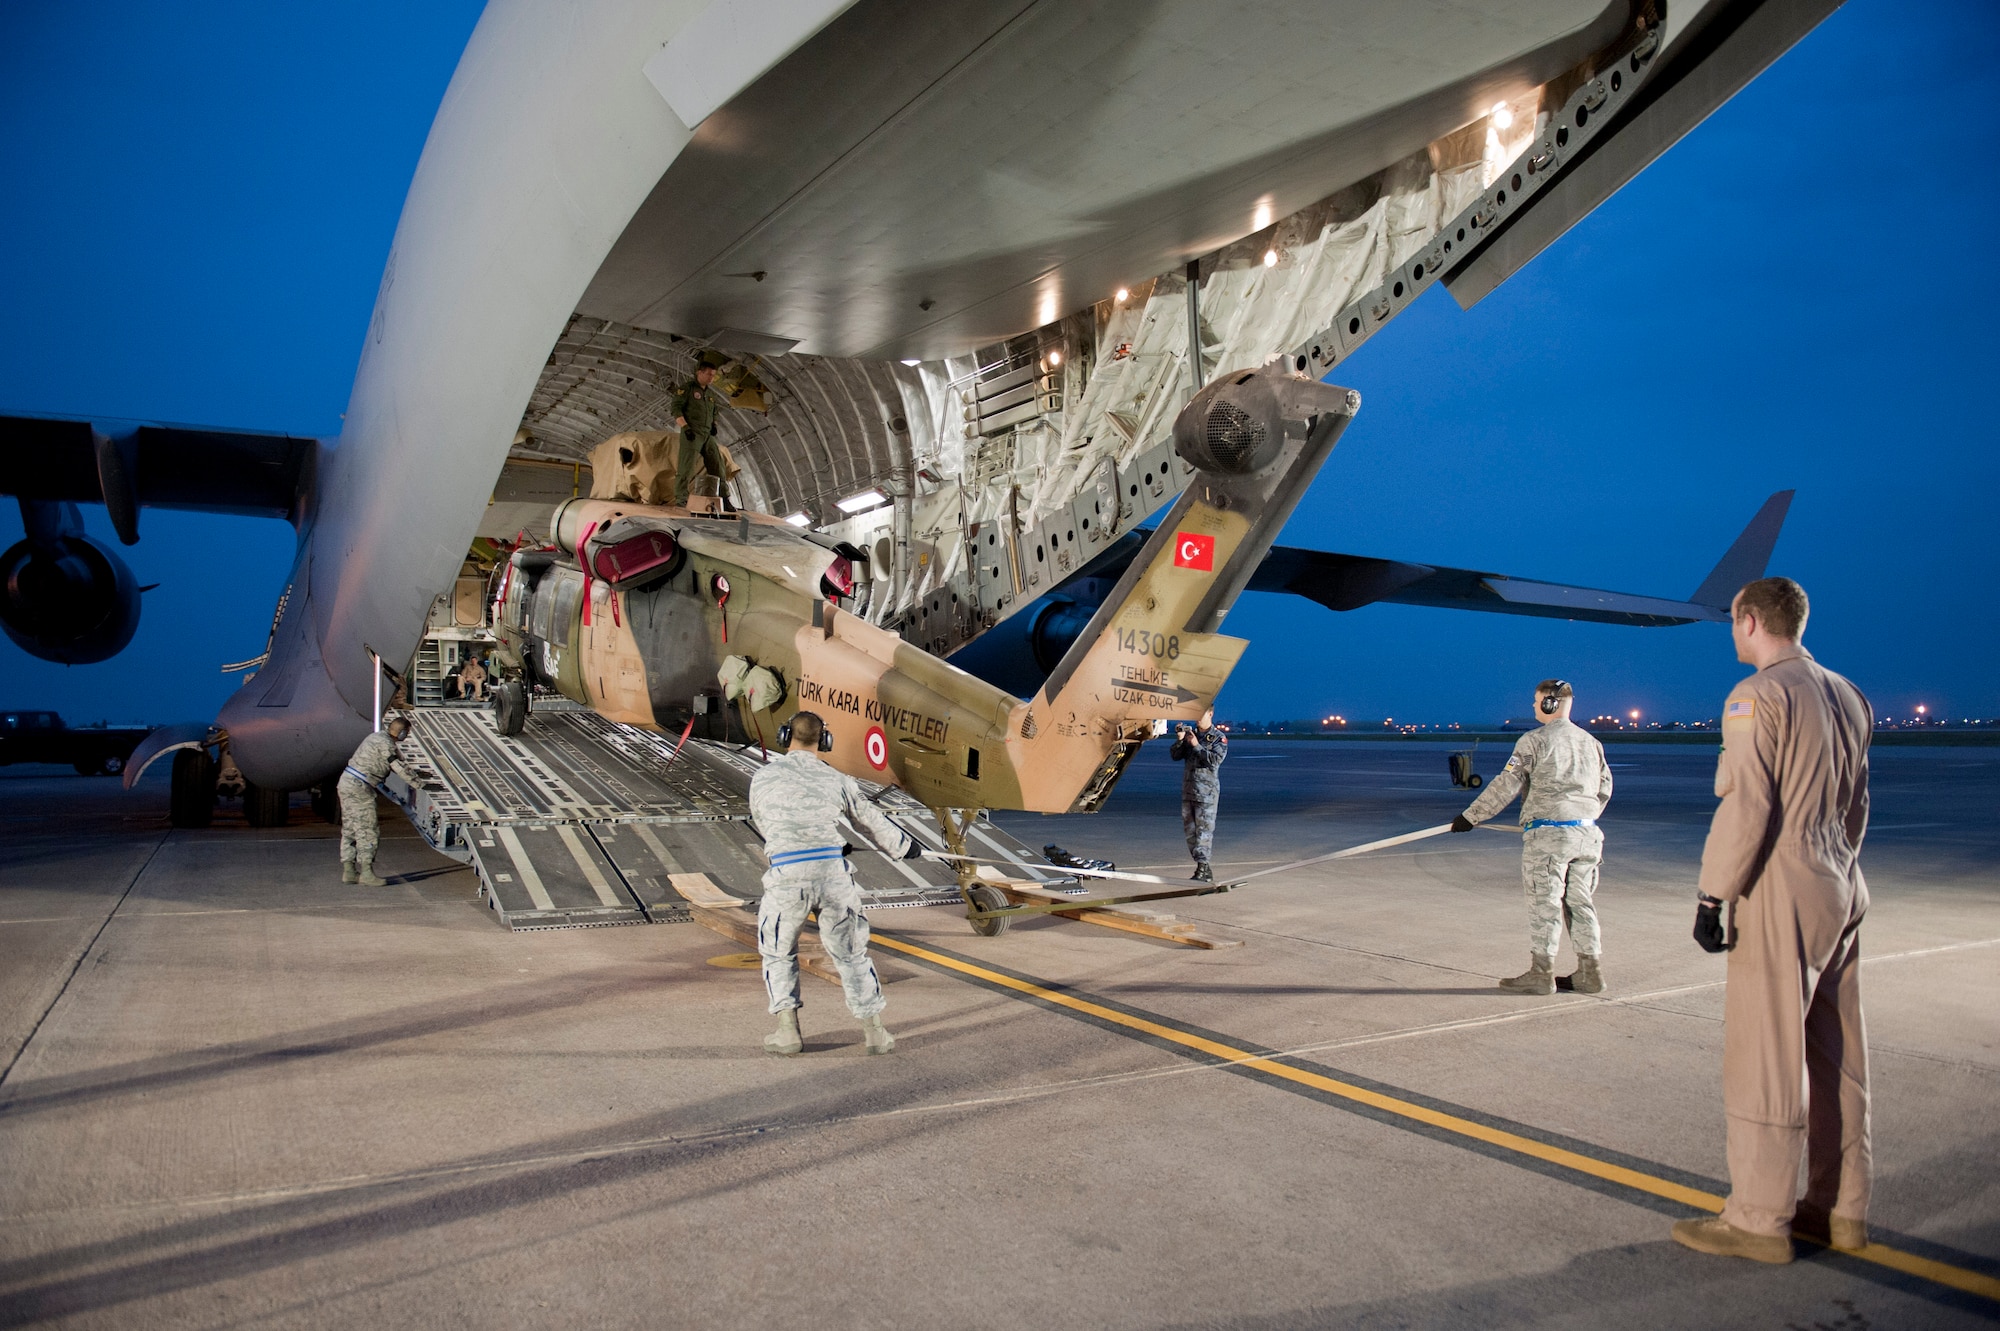 A Turkish air force UH-60 Black Hawk helicopter is loaded onto a U.S. Air Force C-17 Globemaster III May 1, 2012, at Incirlik Air Base, Turkey. A C-17 aircrew from Joint Base McGuire-Dix-Lakehurst, N.J., transported the helicopter to Kabul, Afghanistan, May 5, 2012. The joint support mission provided smooth delivery of the helicopter to replace one that crashed December 2011. (U.S. Air Force photo by Senior Airman Anthony Sanchelli/Released)